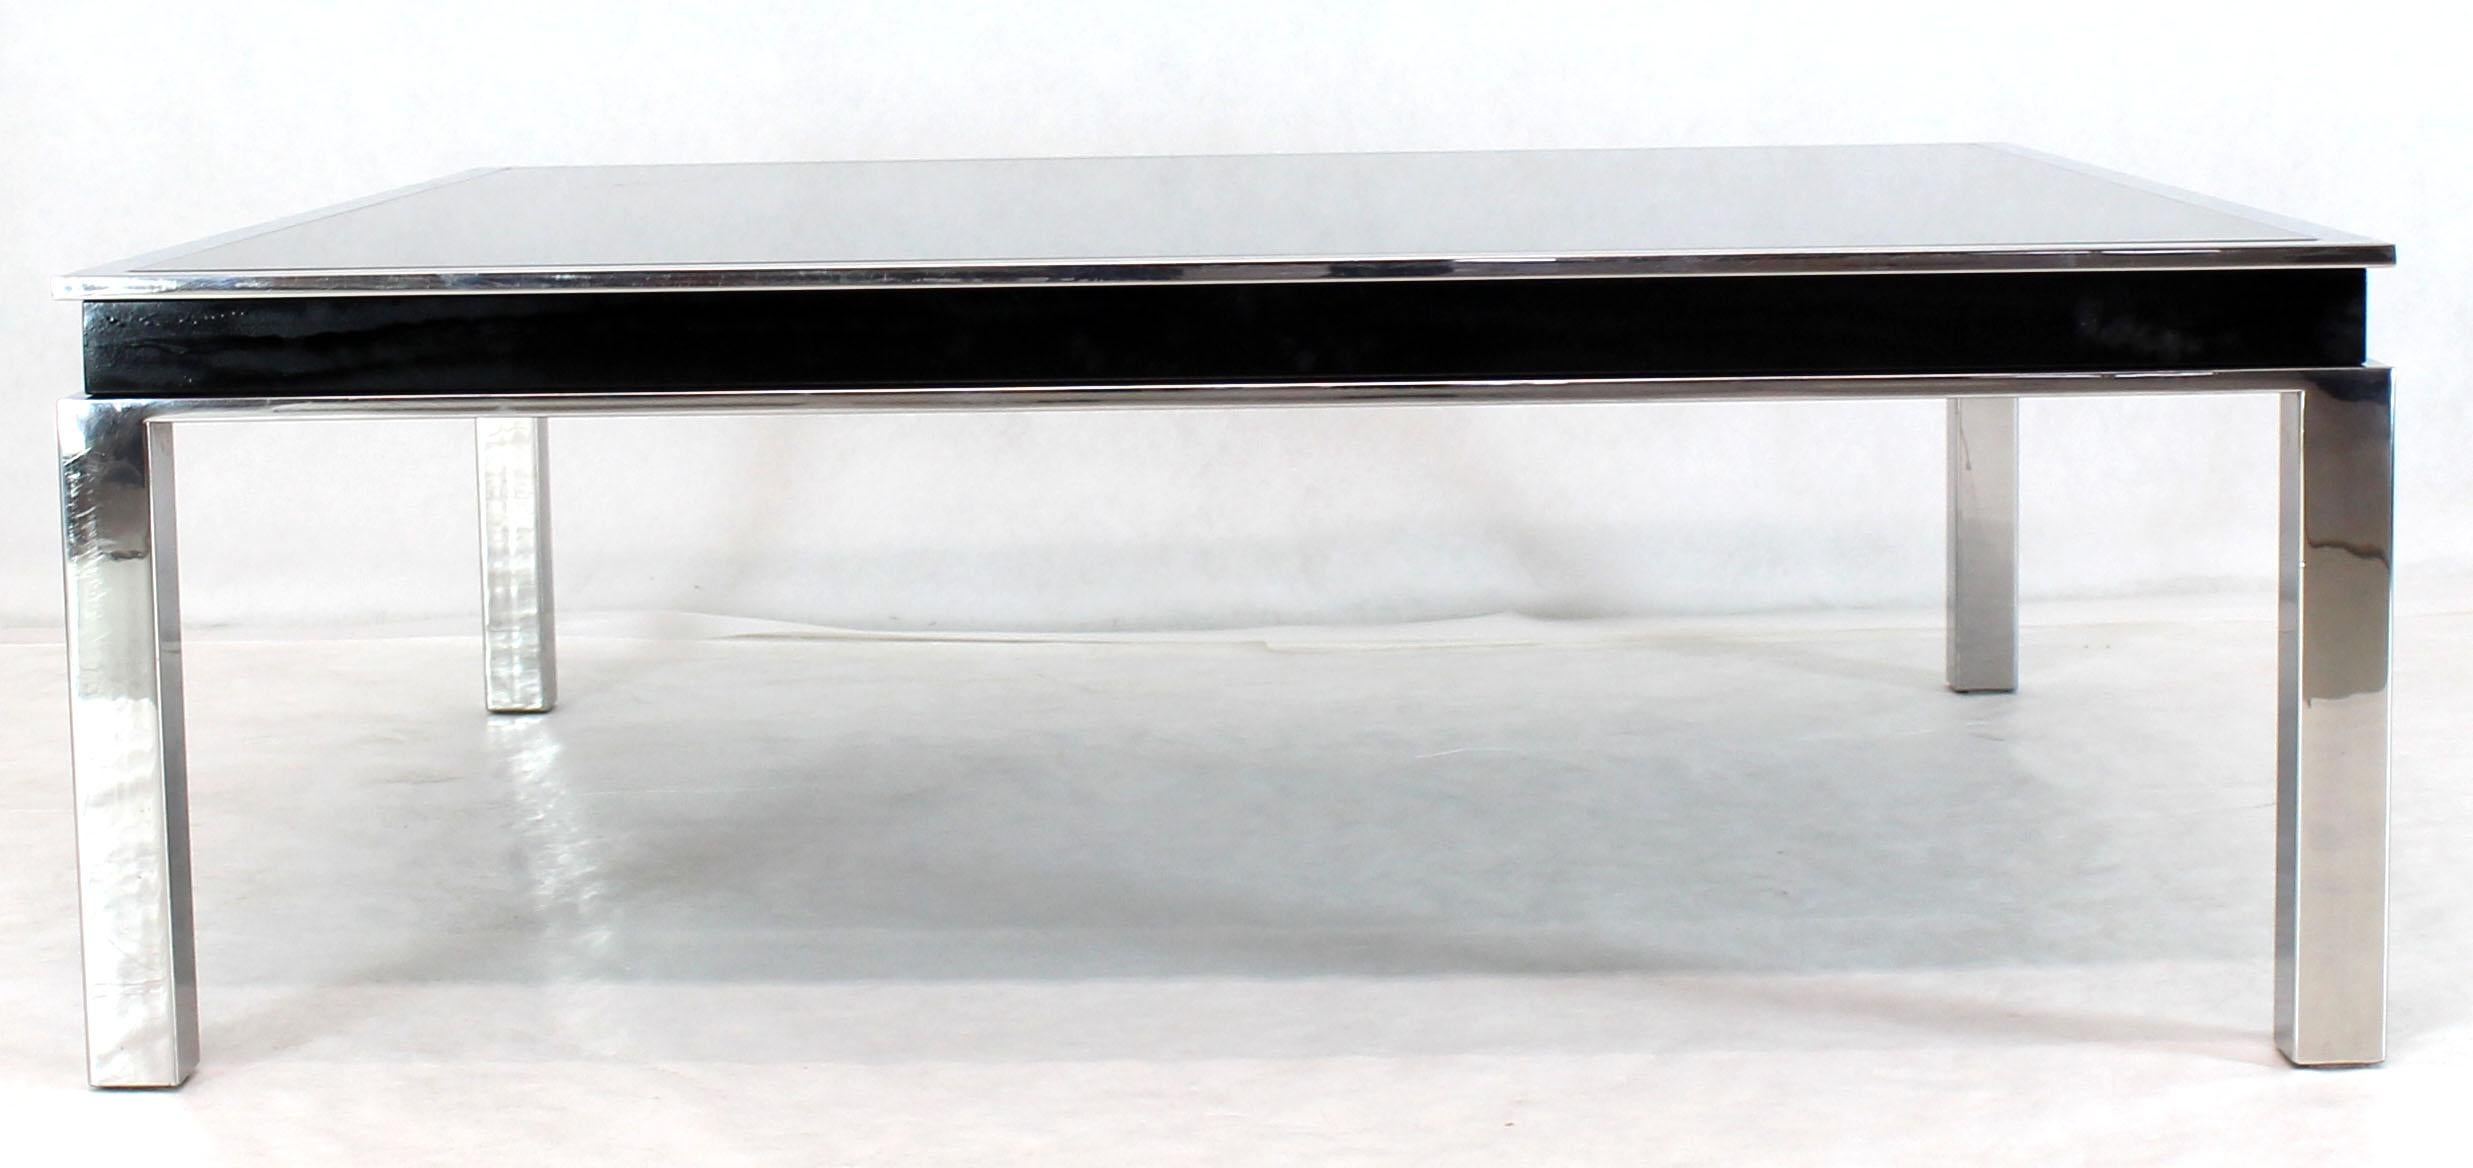 Stainless Steel Extra Large Polished Chrome Square Mid Century Modern Coffee Table Smoked Glass